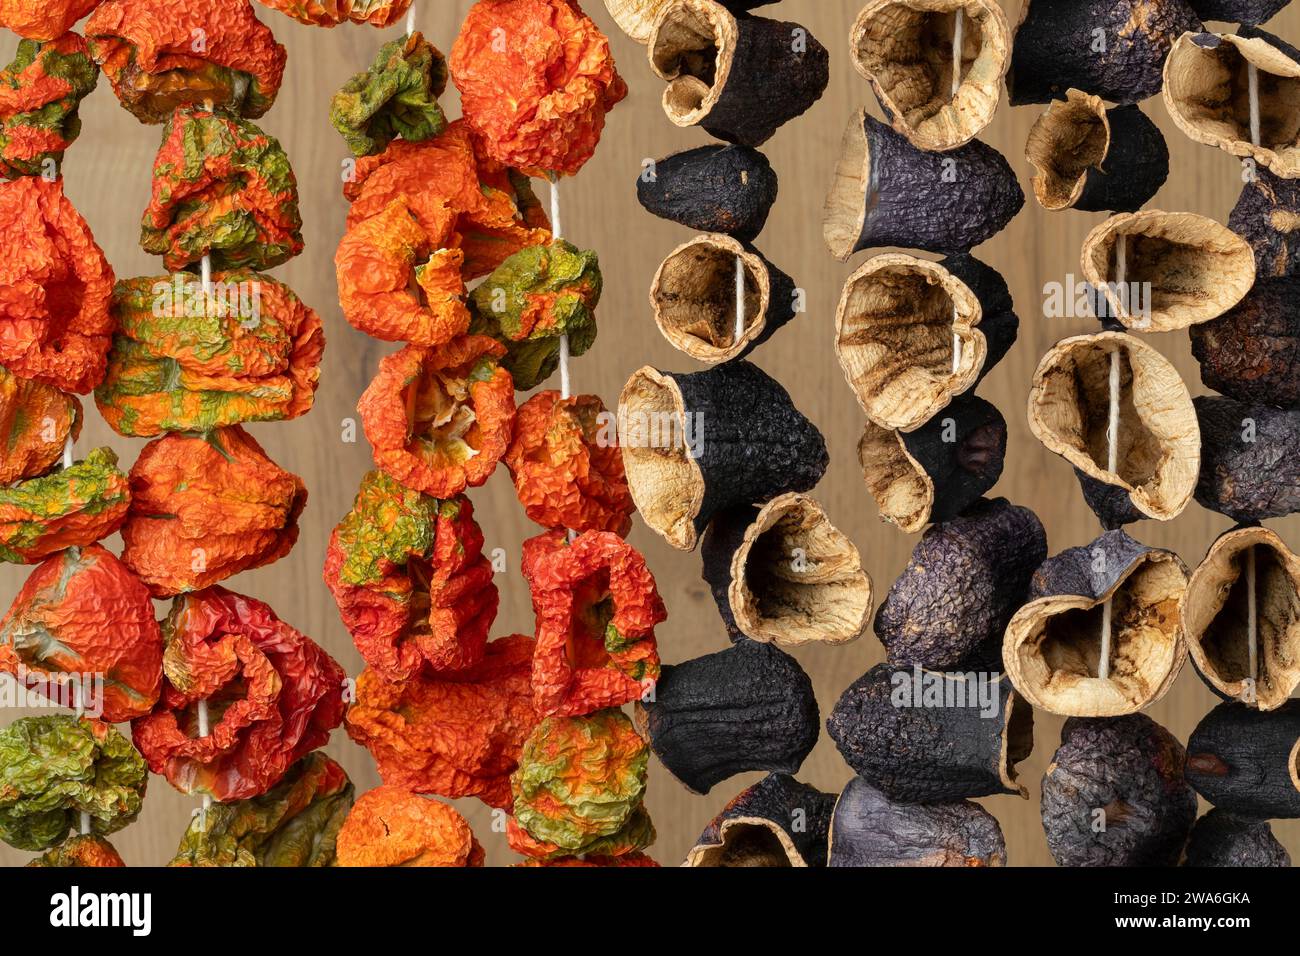 Chain of dried Turkish eggplants and bell peppers close up Stock Photo